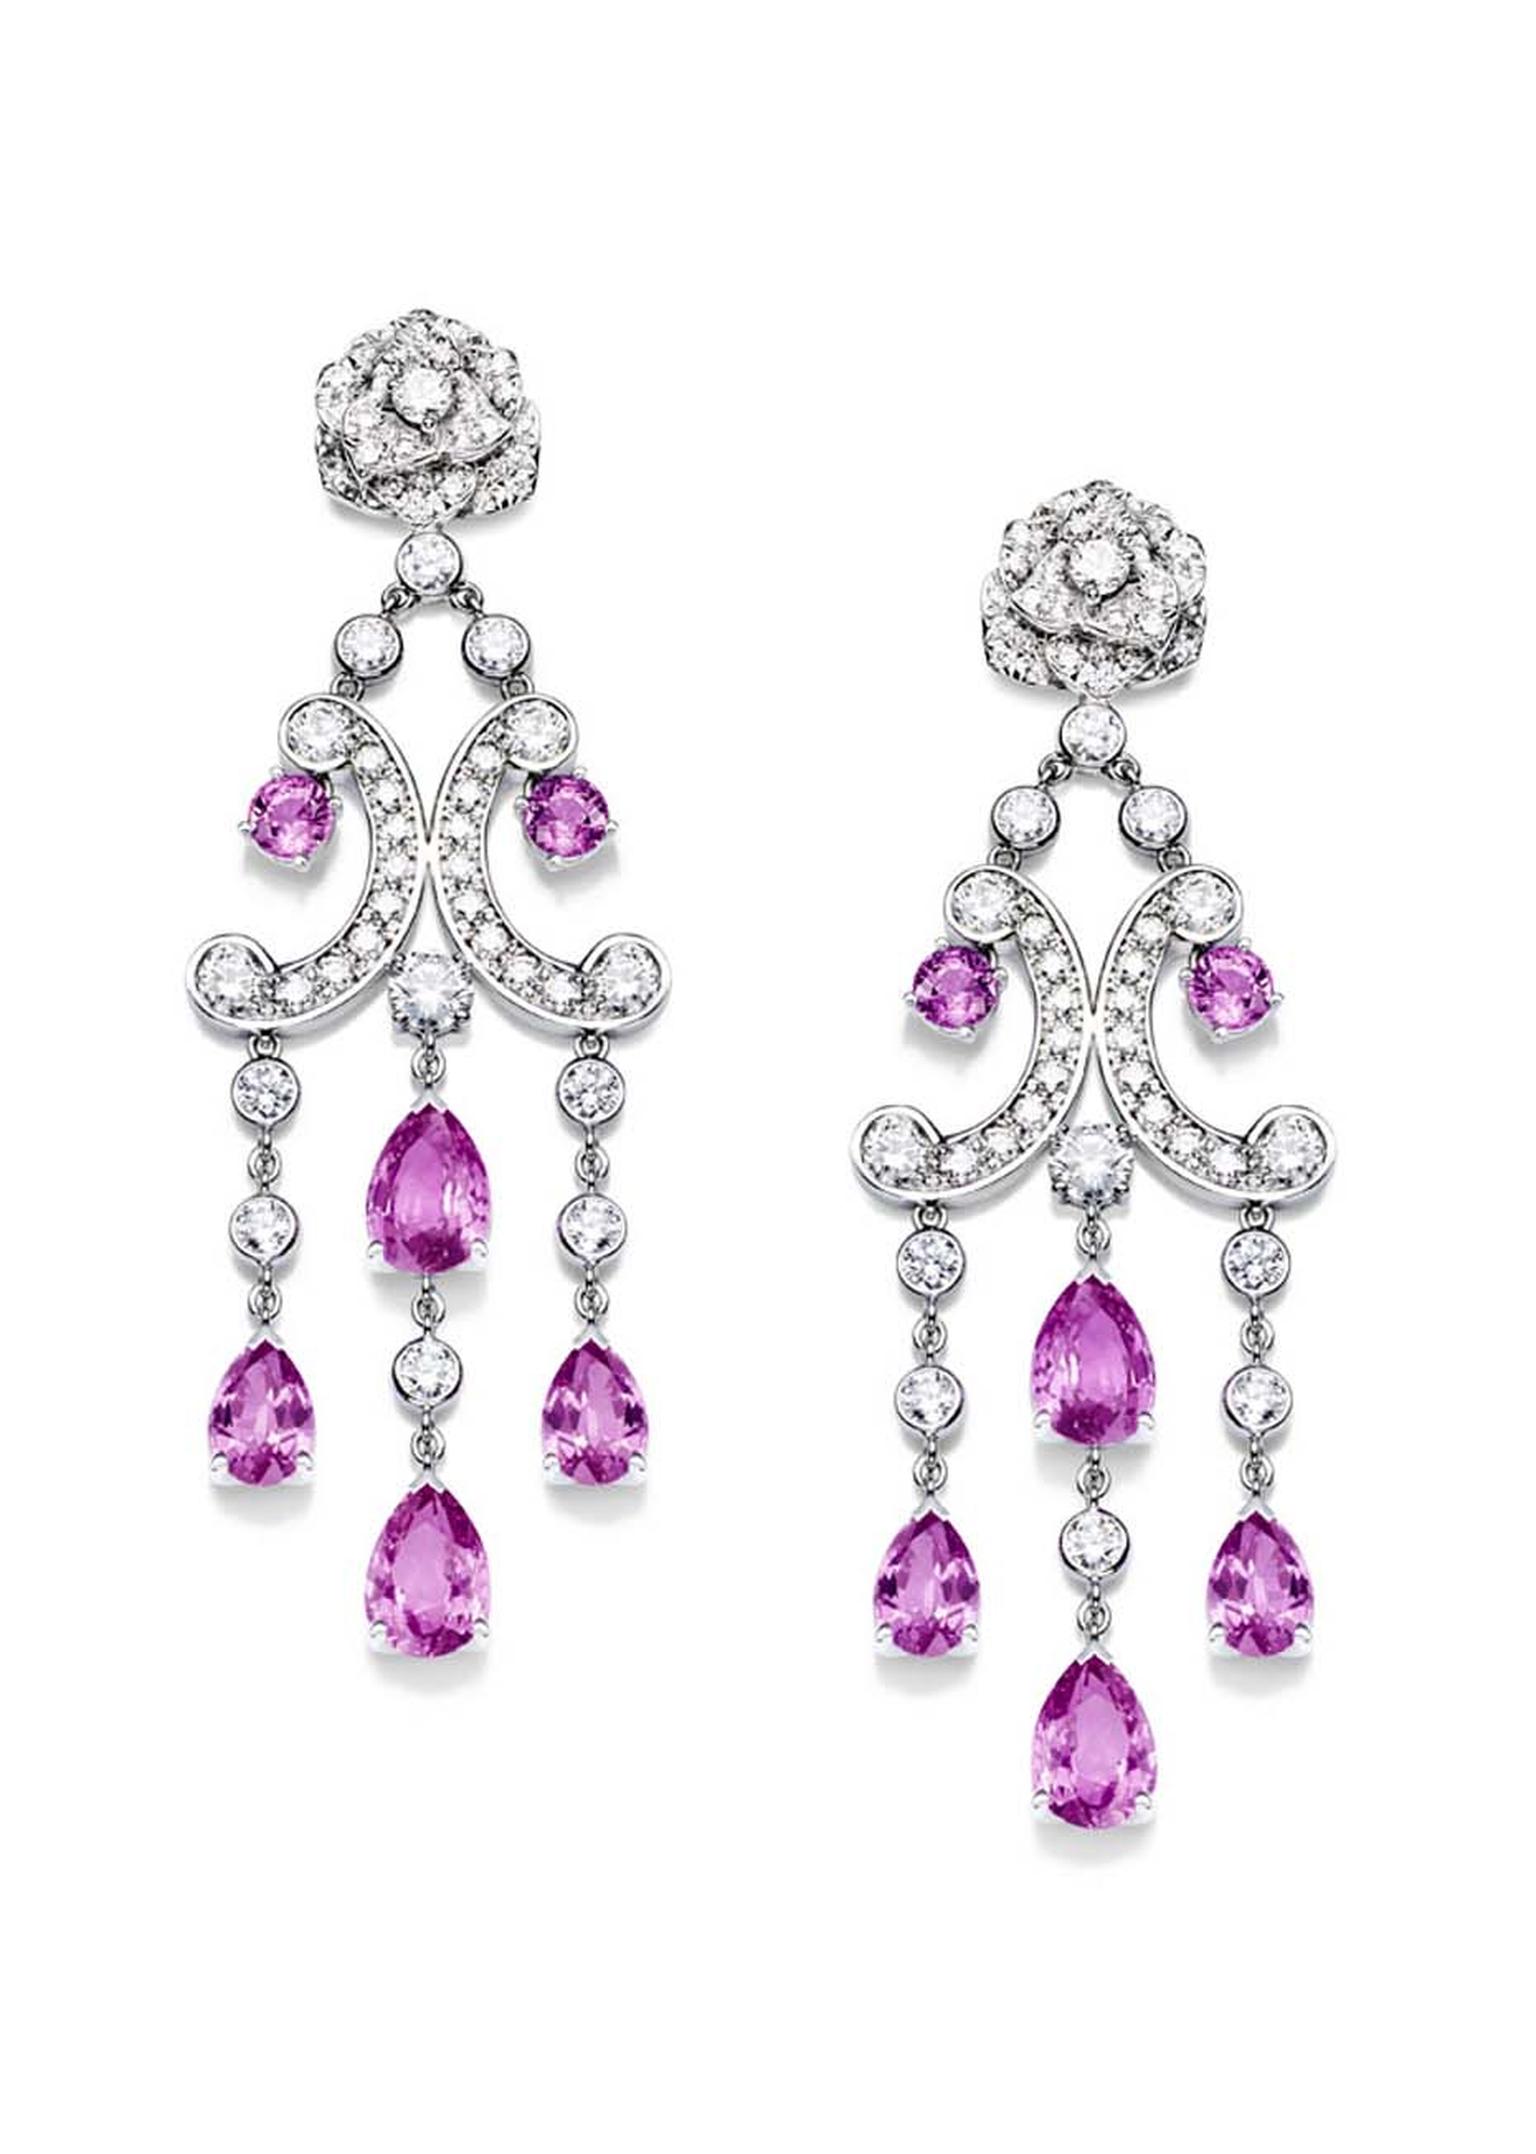 Piaget Rose Passion earrings in white gold, with diamonds and pink sapphires